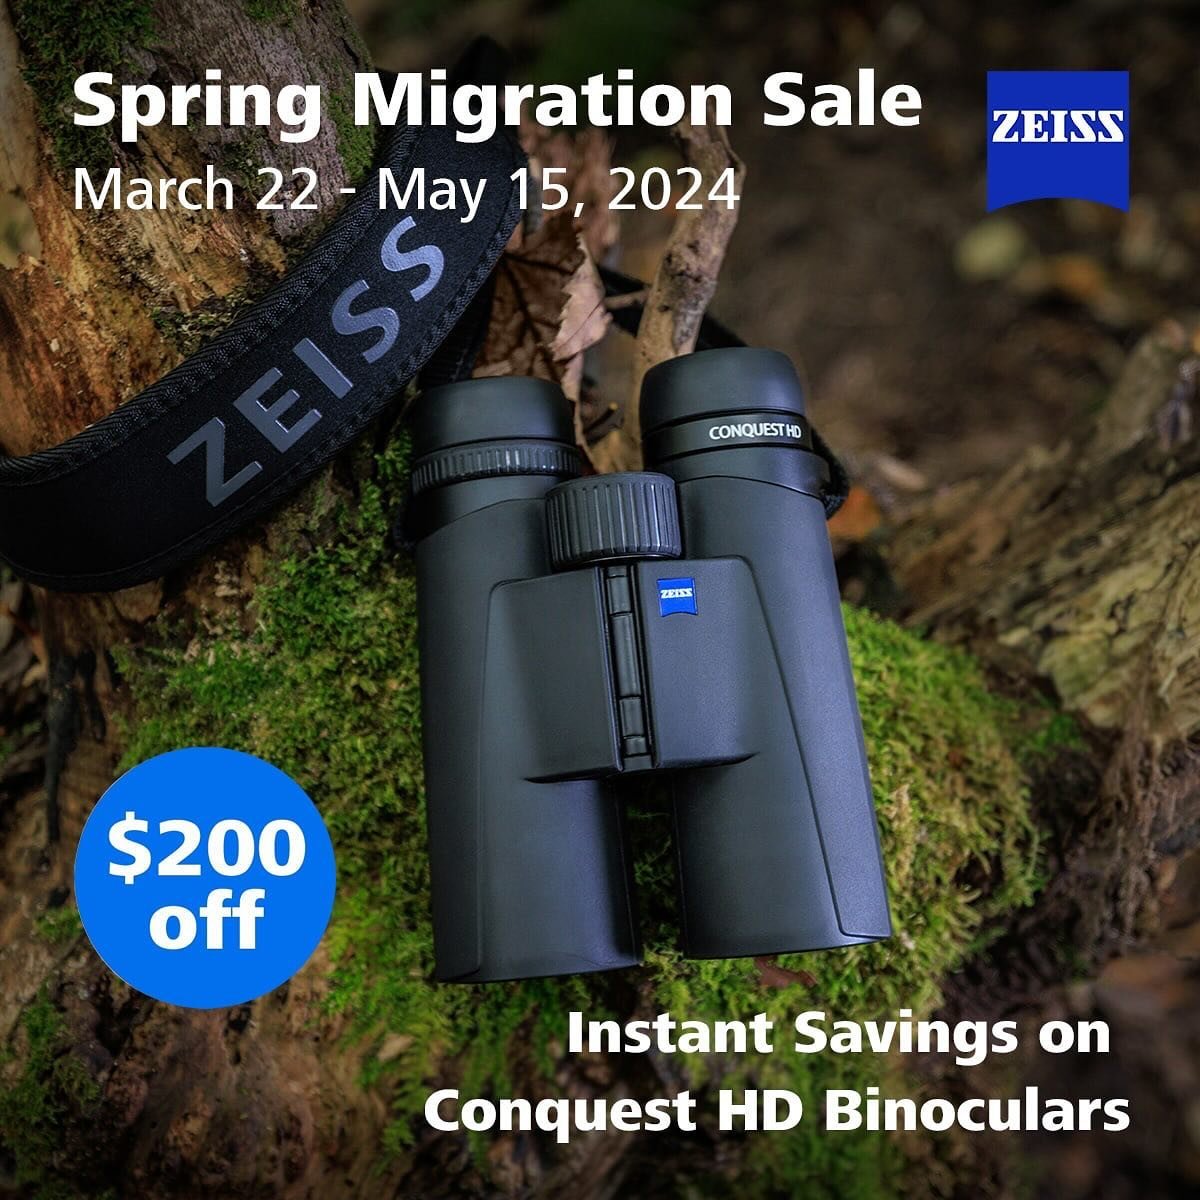 Spring into savings with $200 off all Conquest HD binoculars at Wild Bird &amp; Garden! As spring migration heats up, don&rsquo;t miss out on this opportunity to upgrade your optics.

#zeiss #zeissoptics #upgrade #wildbirdandgarden #shopsmall #localb